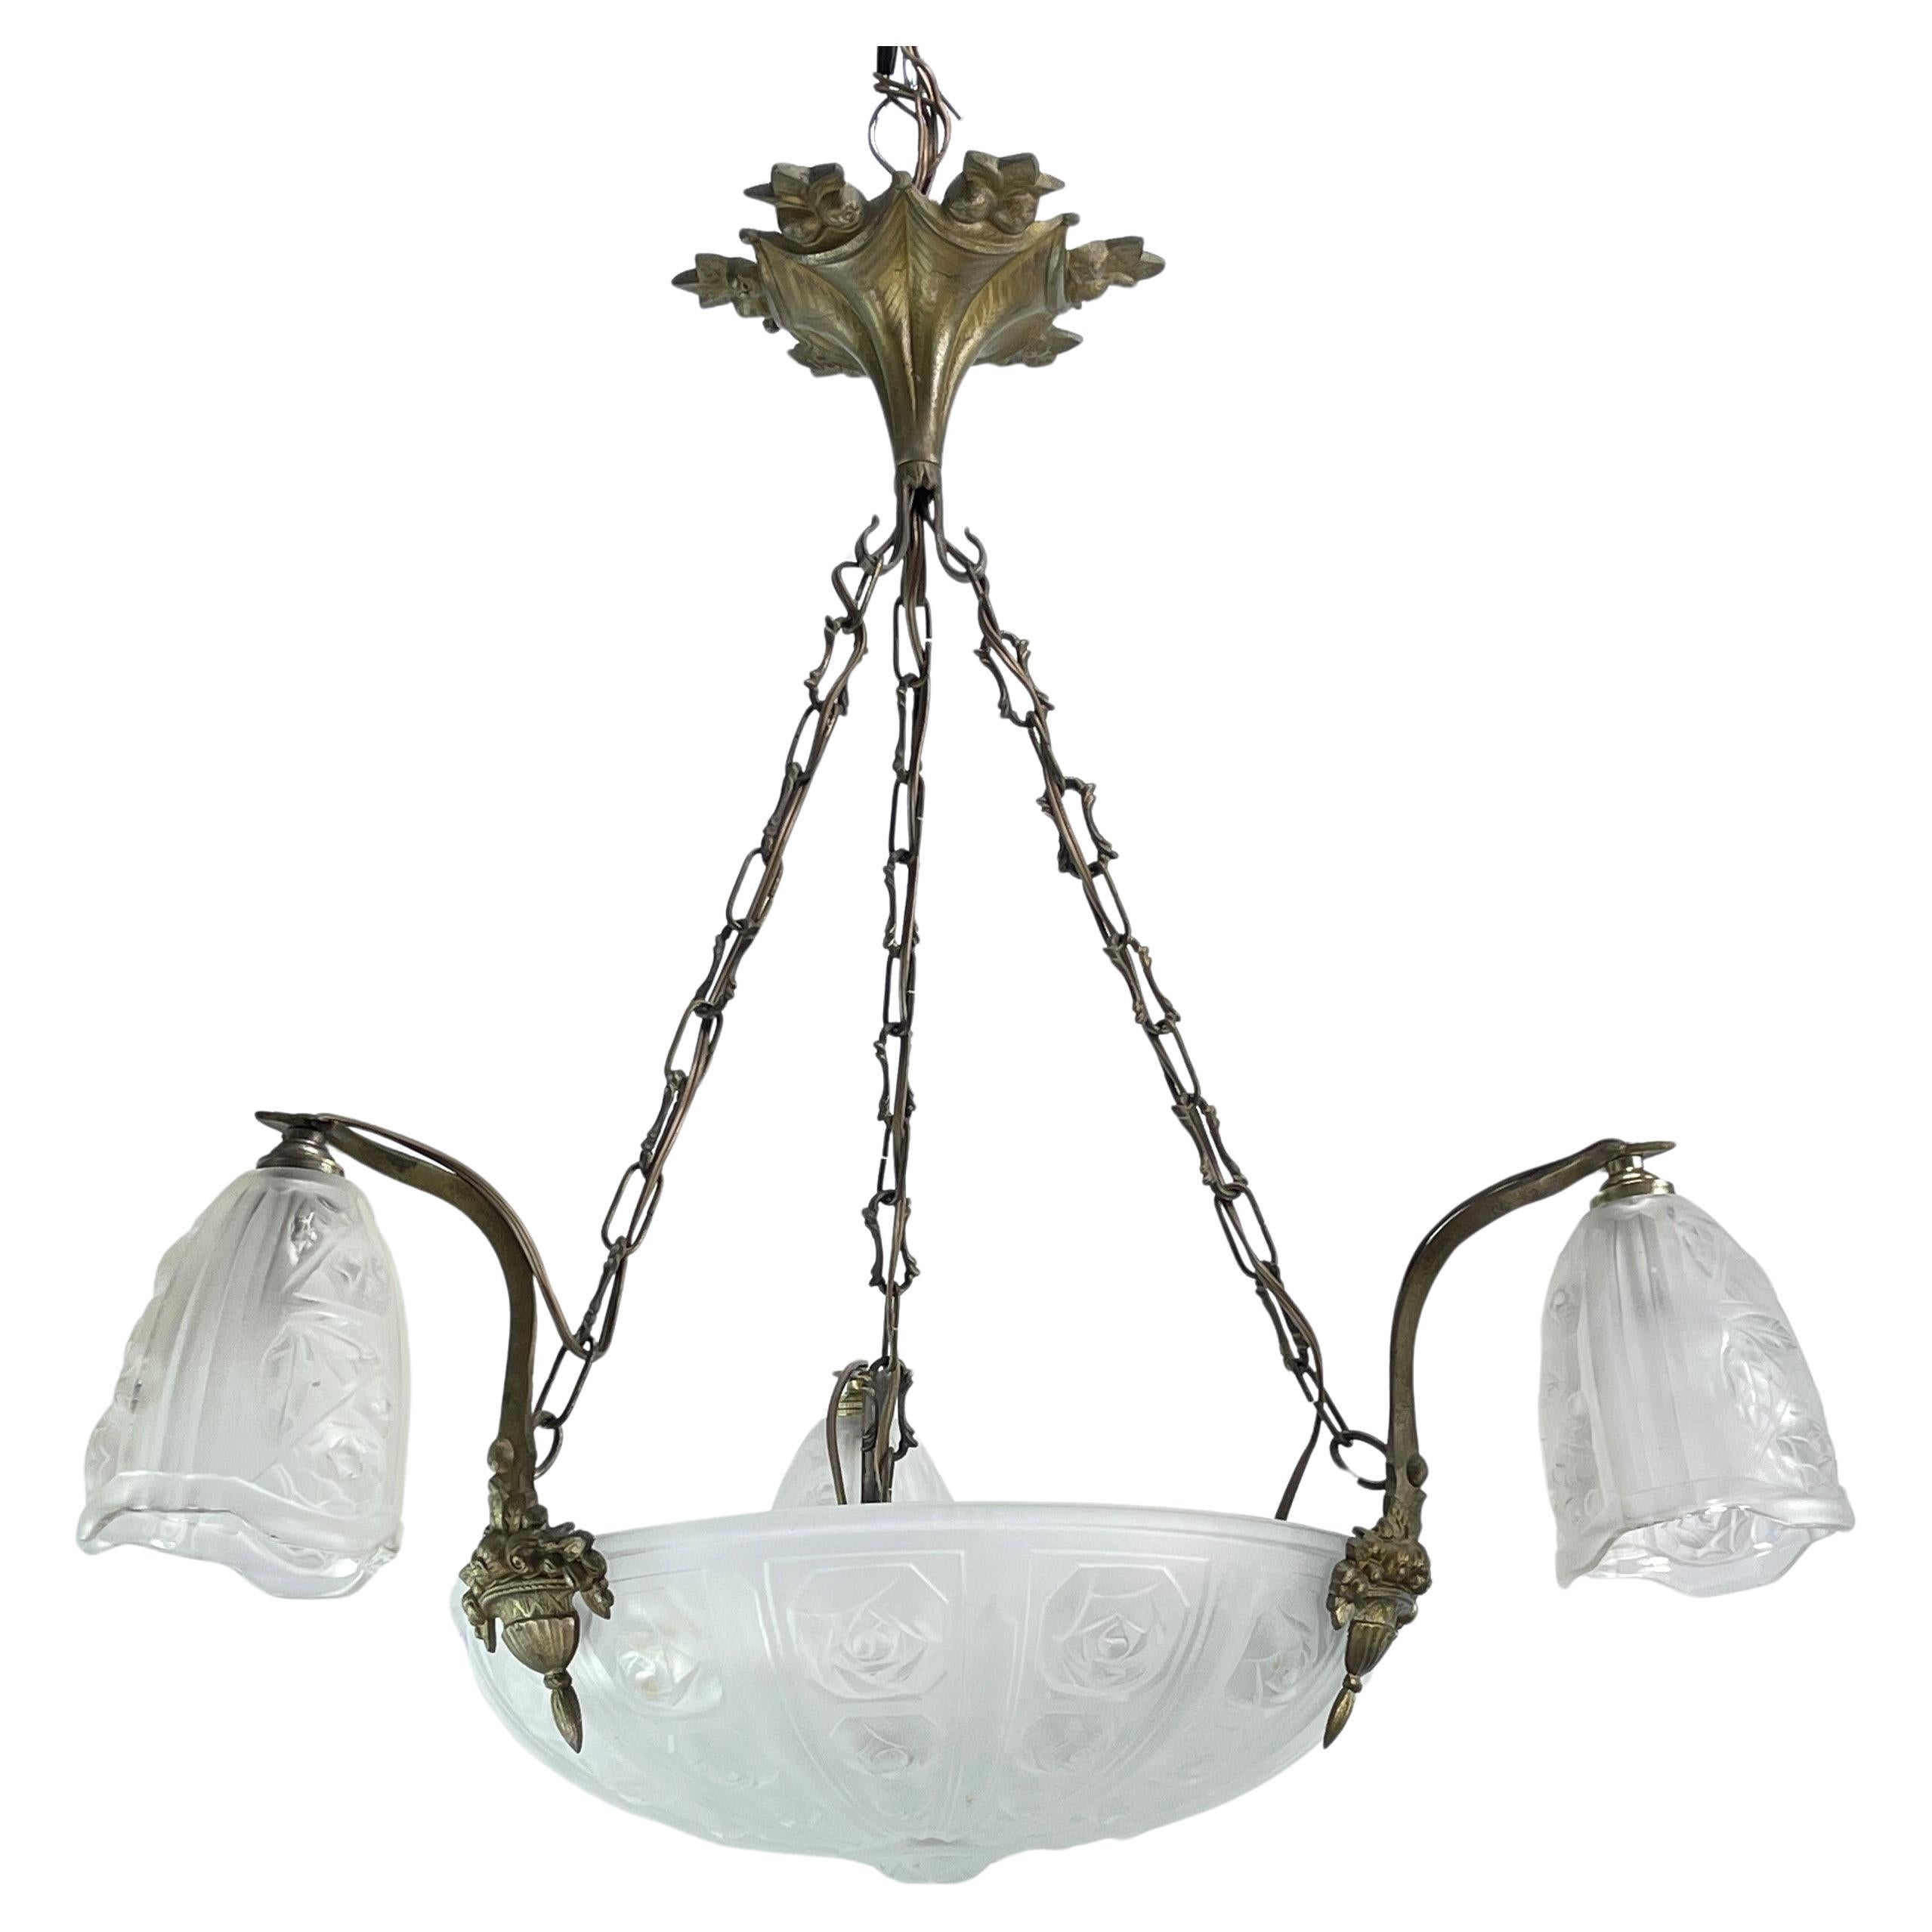 Art Deco Chandelier Hanging Lamp with rose décor, 1930s For Sale